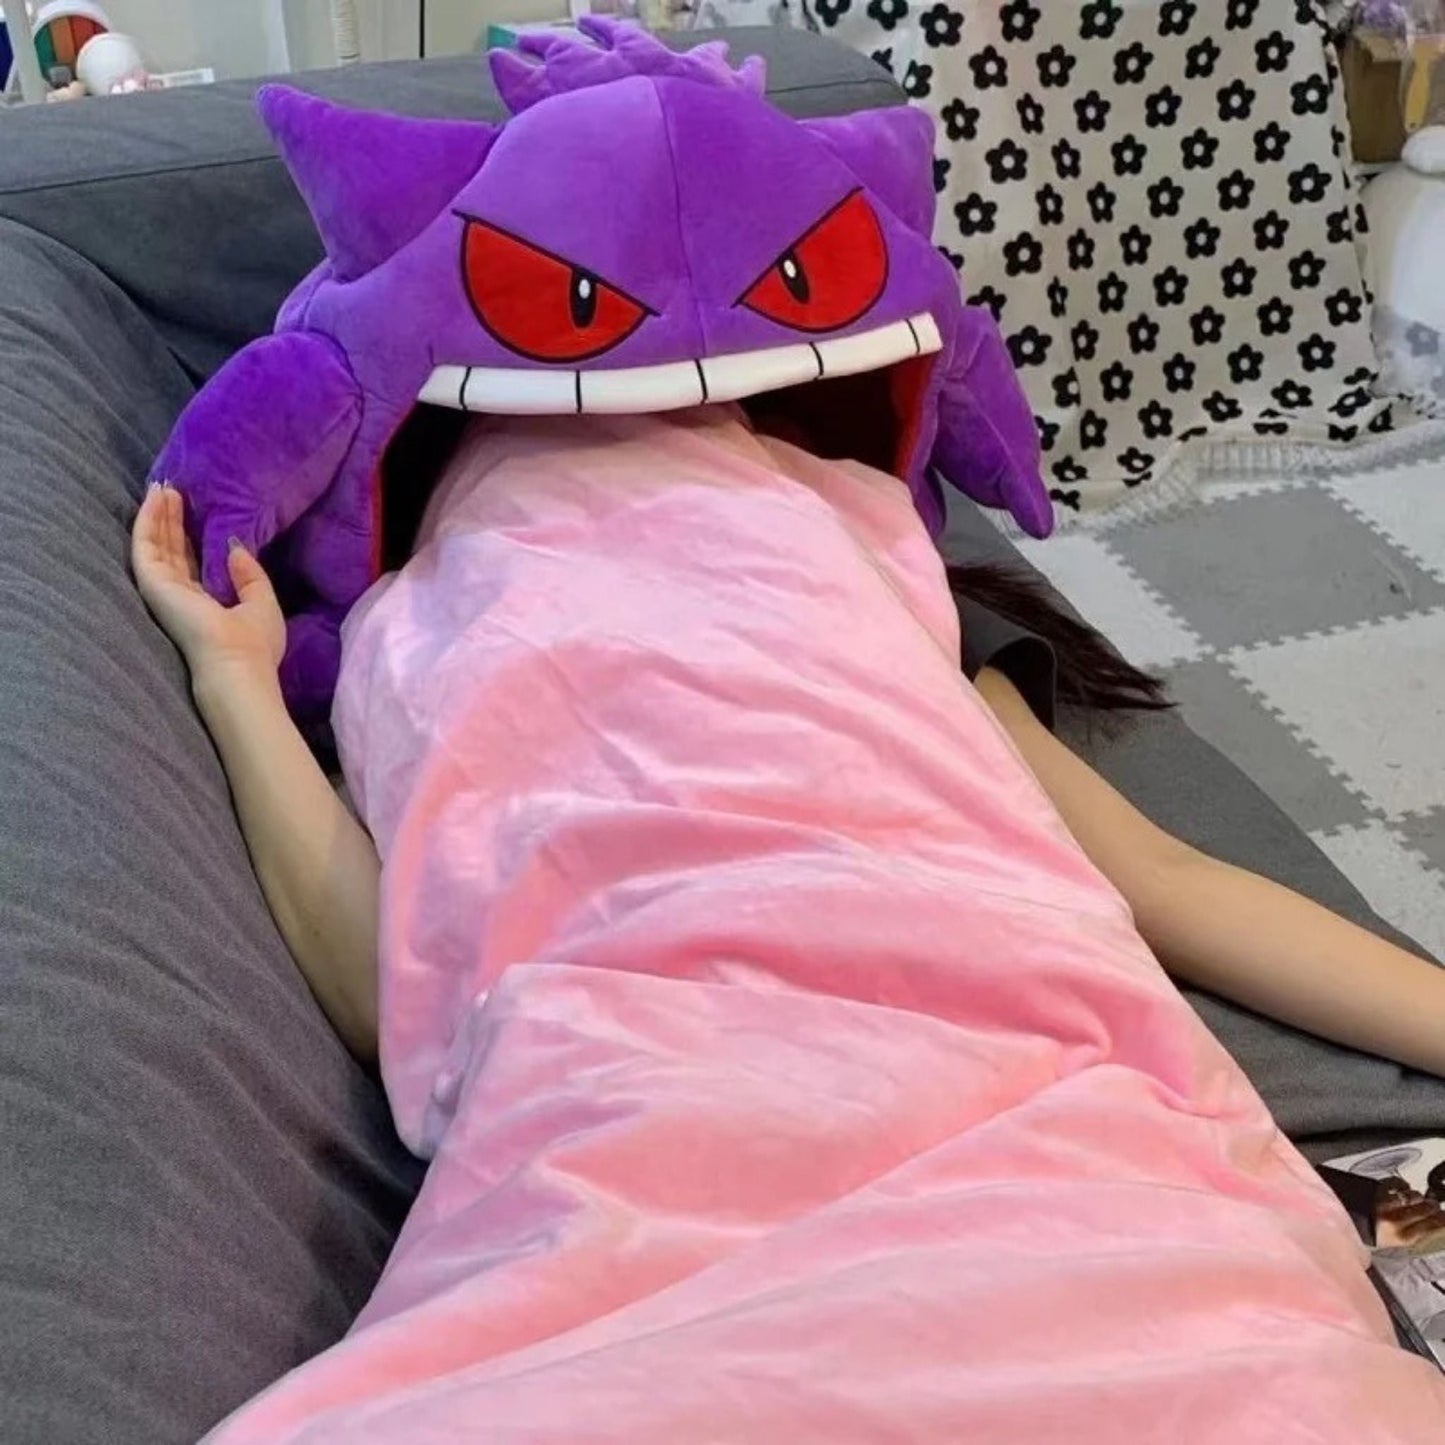 Main Image - Gengar Tongue Pillow Blanket Sleeping Pod For Afternoon Naps. Portable design for travel, work and on the go napping. Perfect gift for Pokémon fans.